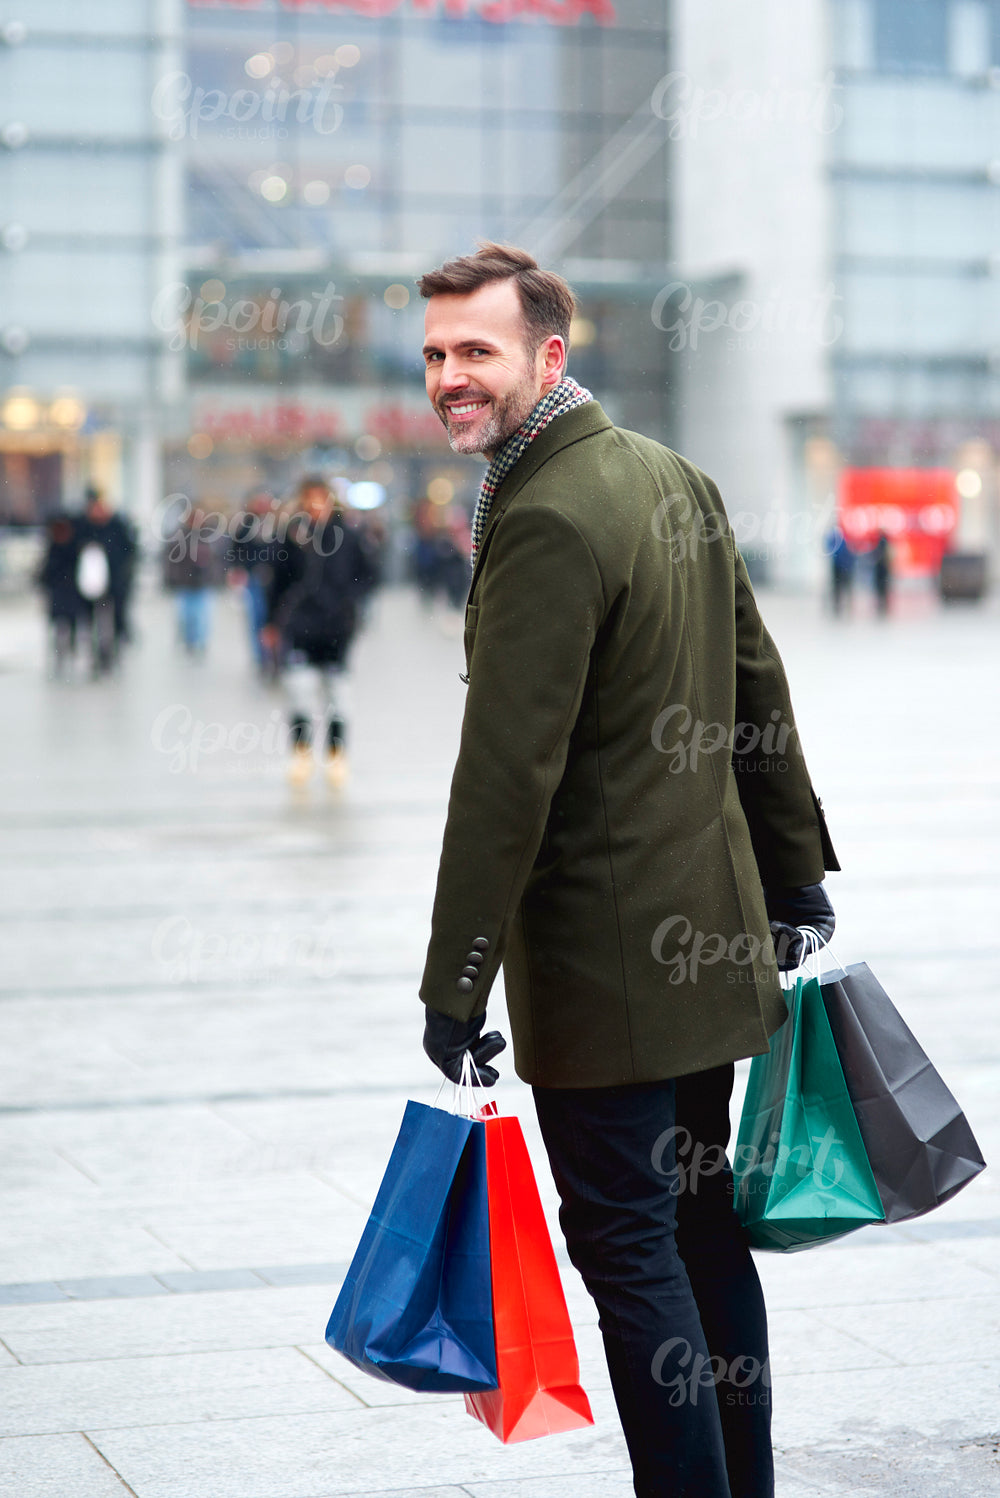 Turning man with shopping bags walking down the city street